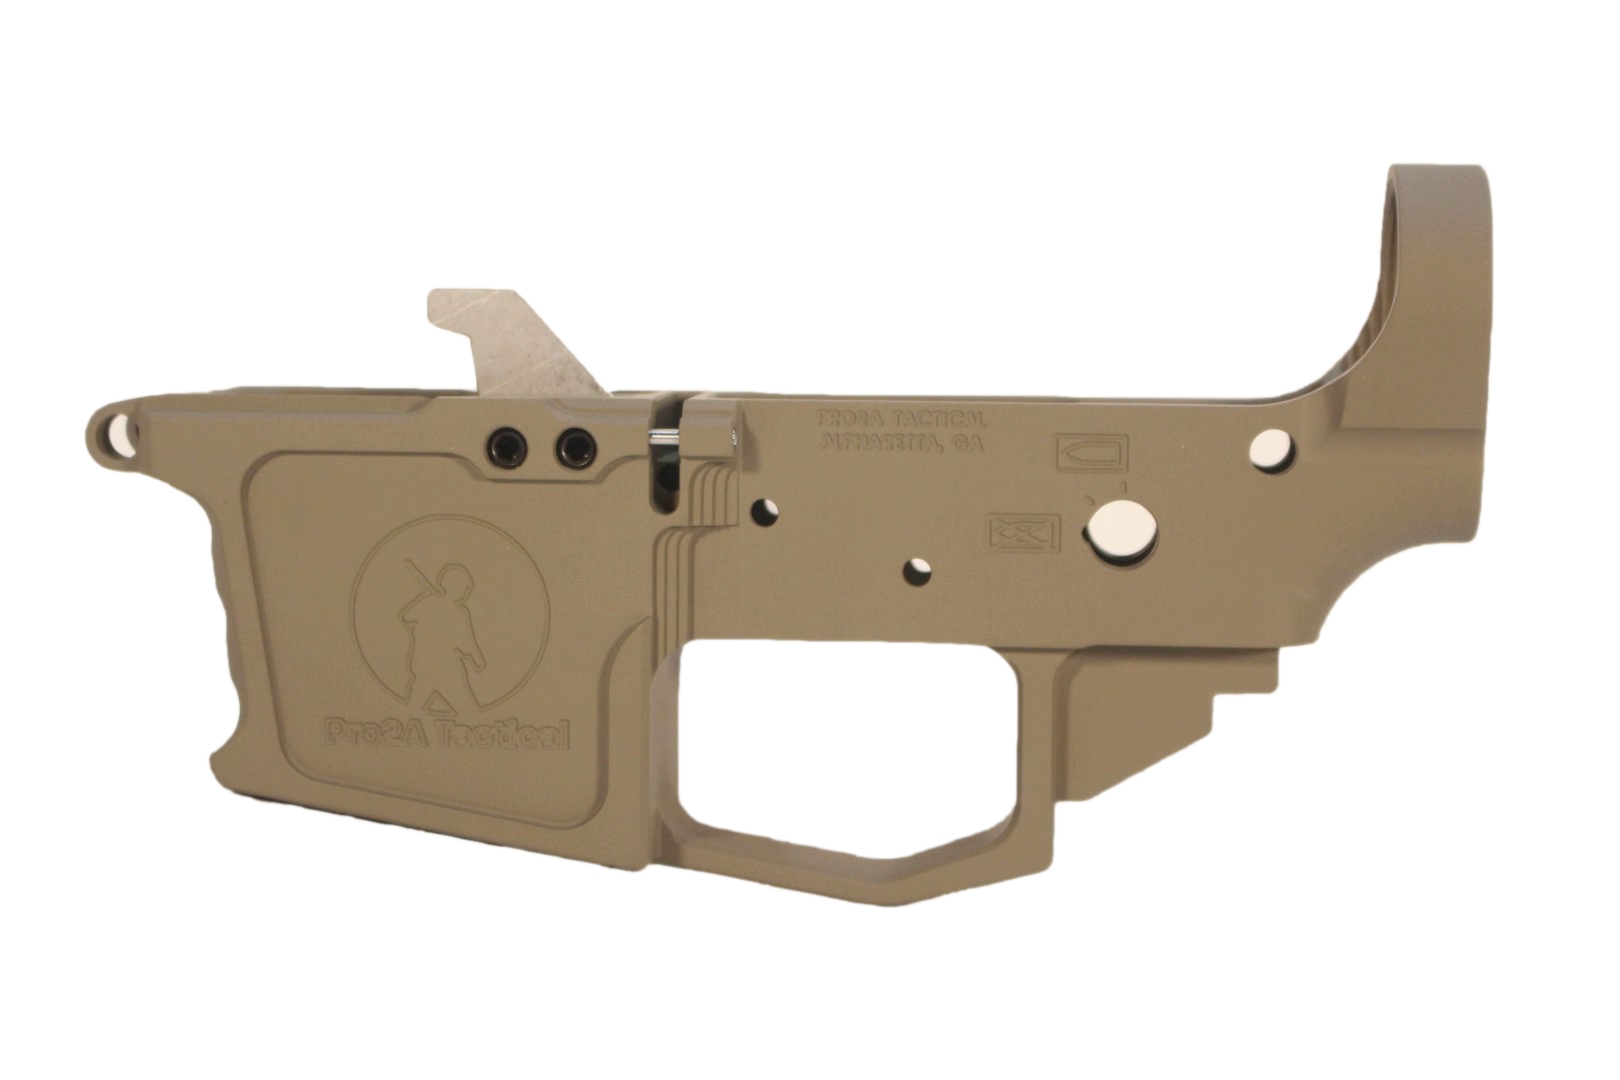 45ACP/10mm AR-45 Stripped Billet Lower Receiver - Magpul FDE Color By Pro2A Tactical